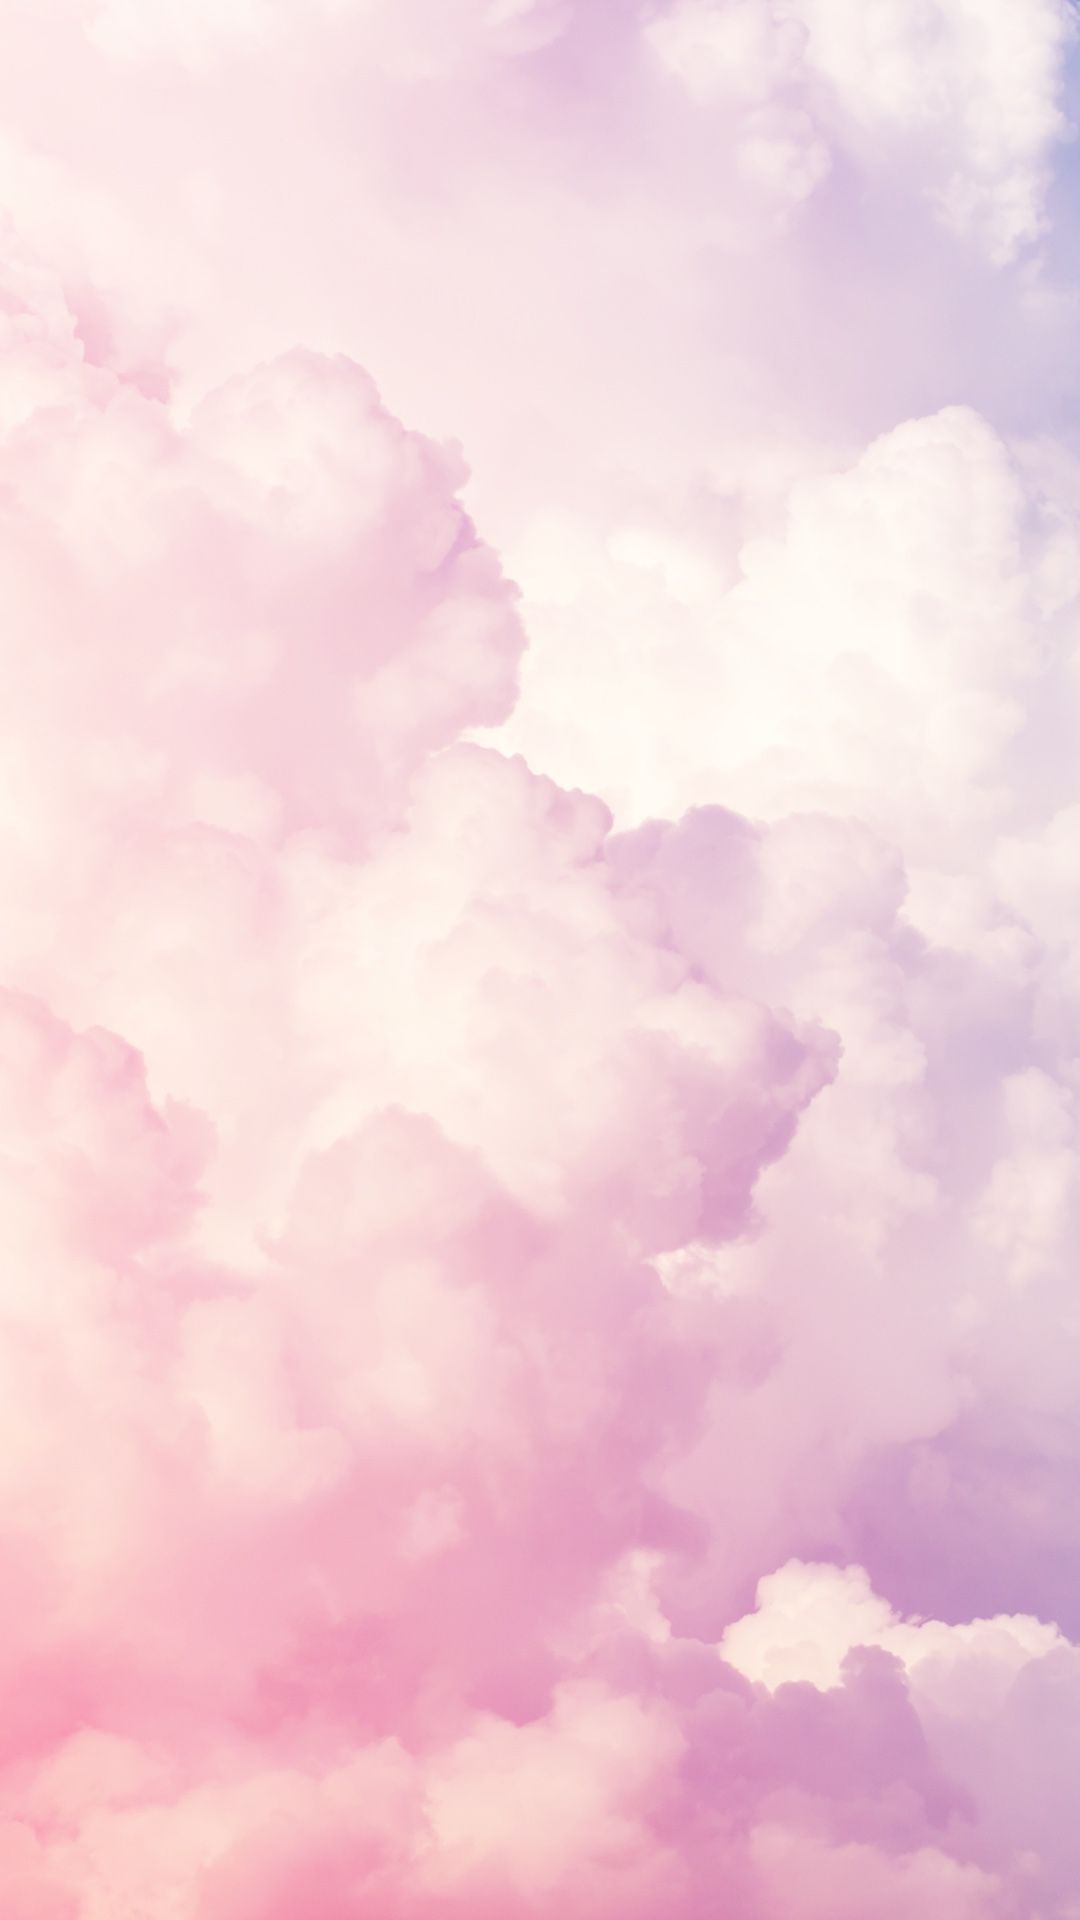 Pink clouds mood! Enjoy new wallpaper for your iPhone 8